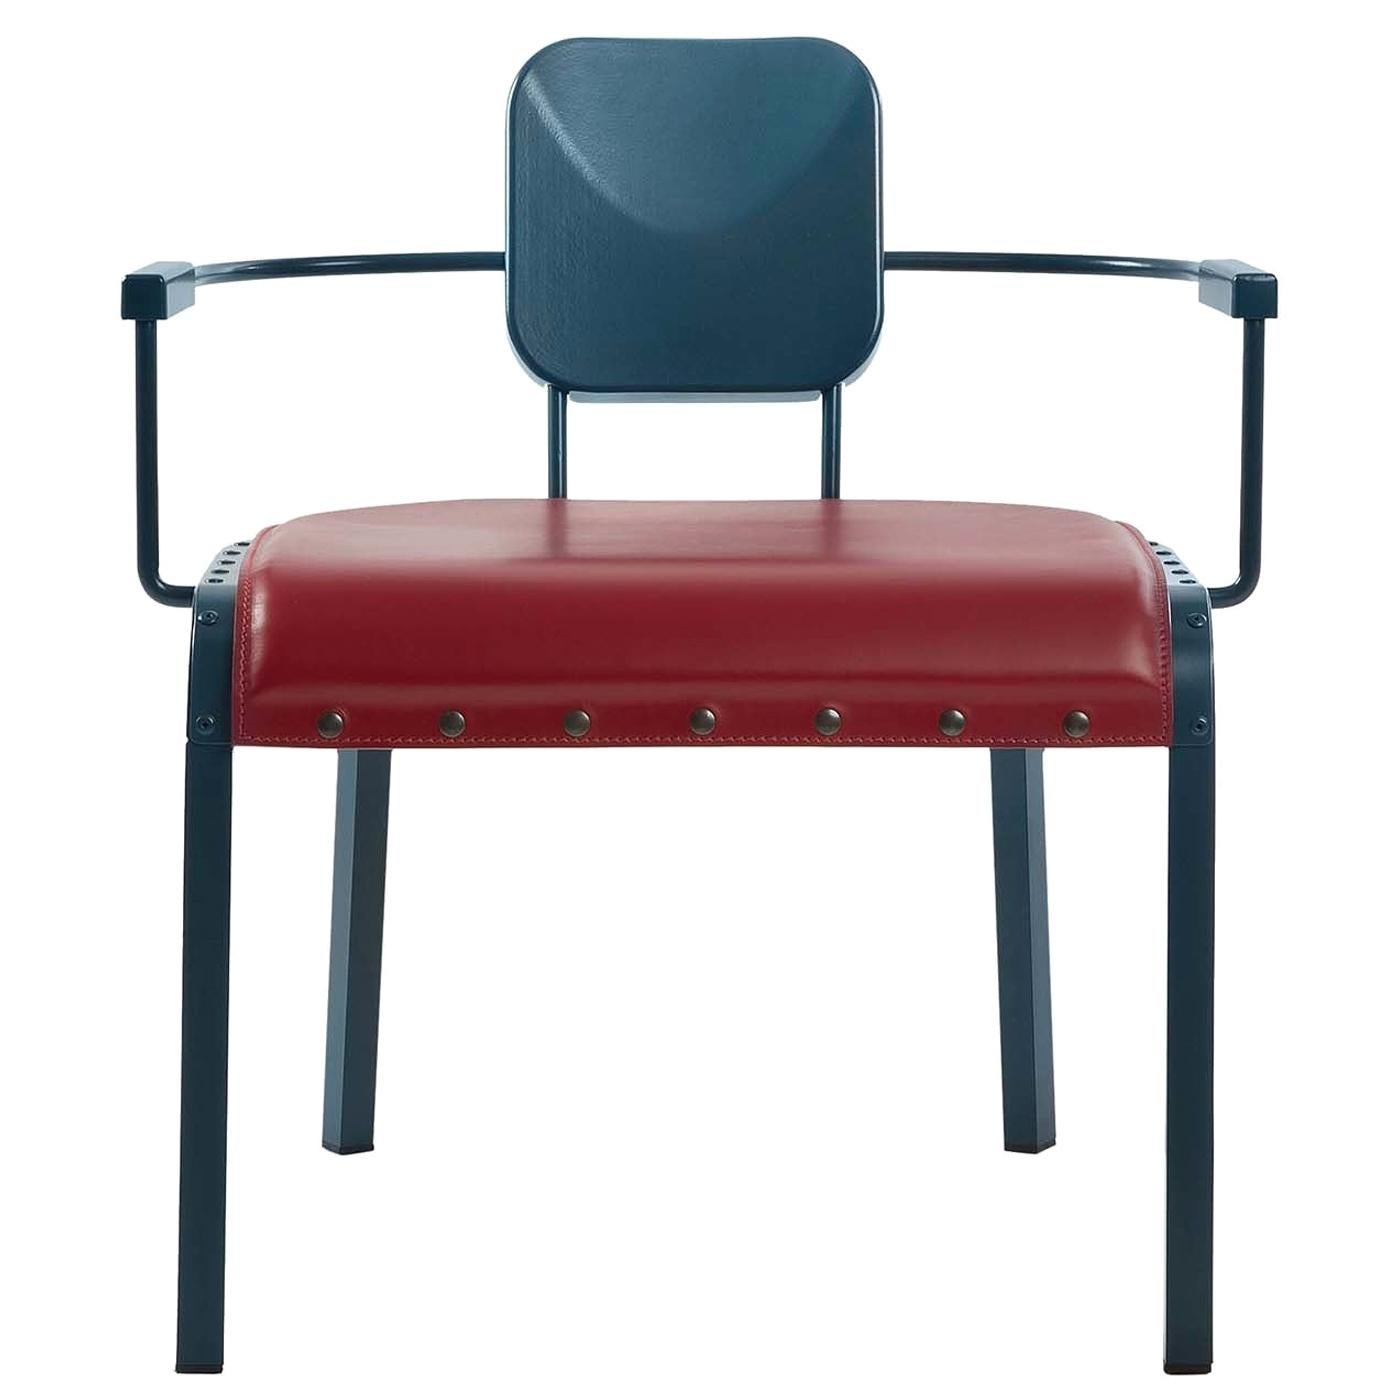 Rock4 Blue Lounge Armchair with Red Leather Seat by Marc Sadler